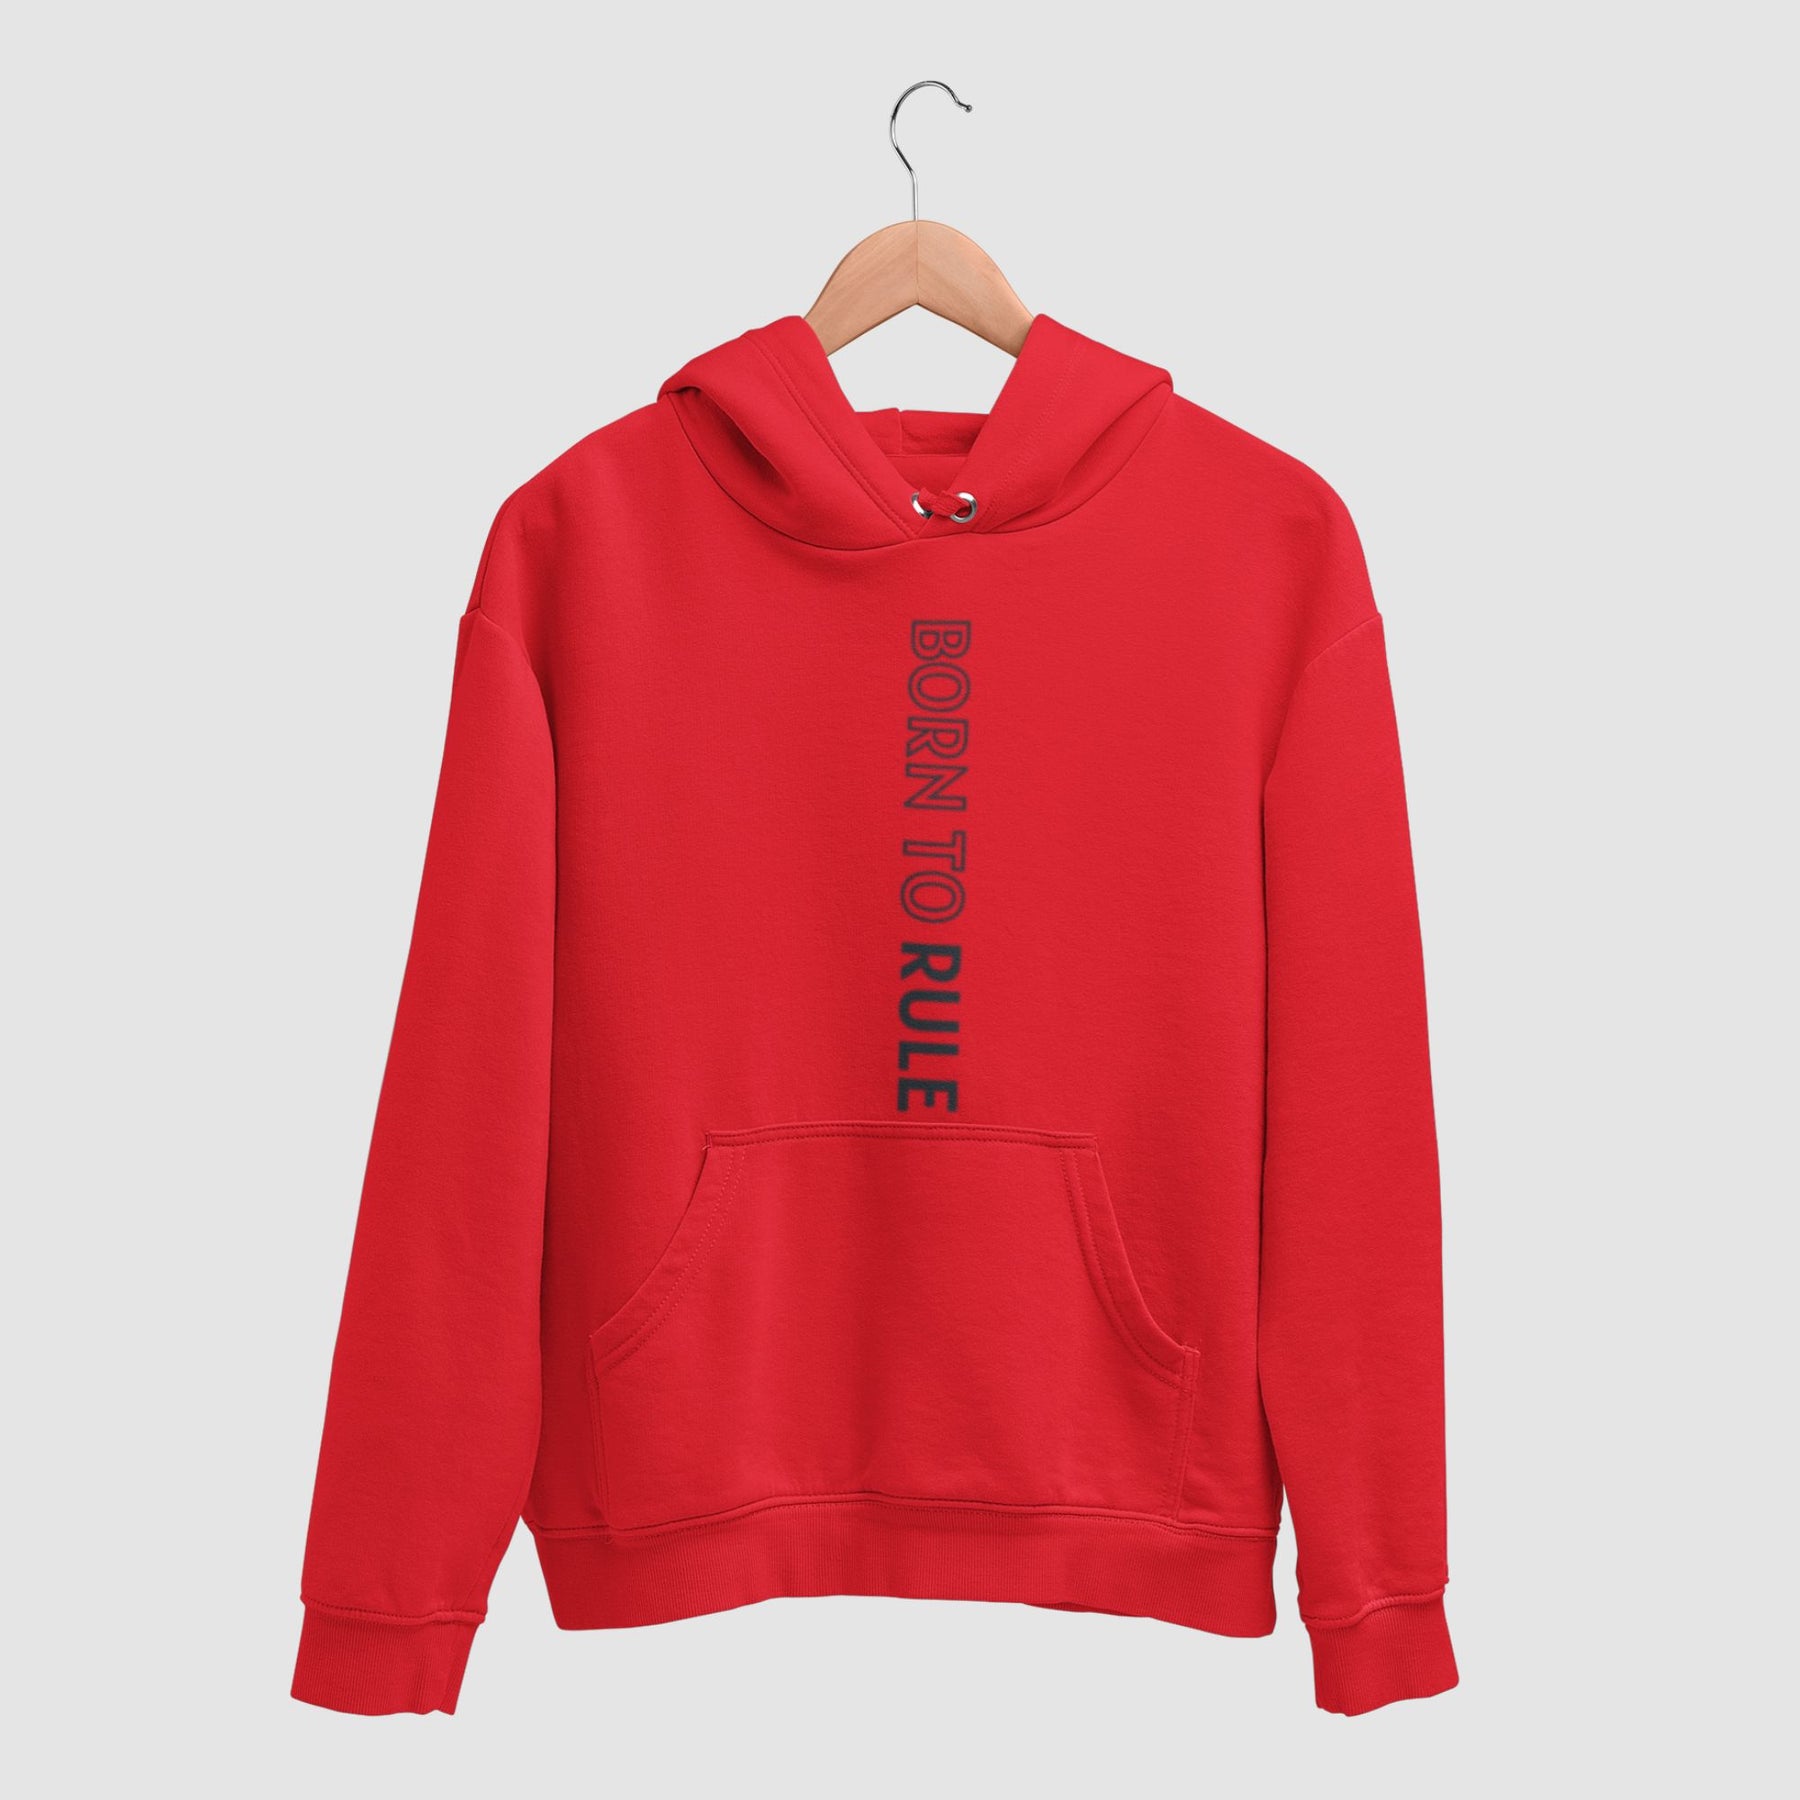 born-to-rule-cotton-printed-unisex-red-for-men-for-women-hoodies-gogirgit-com